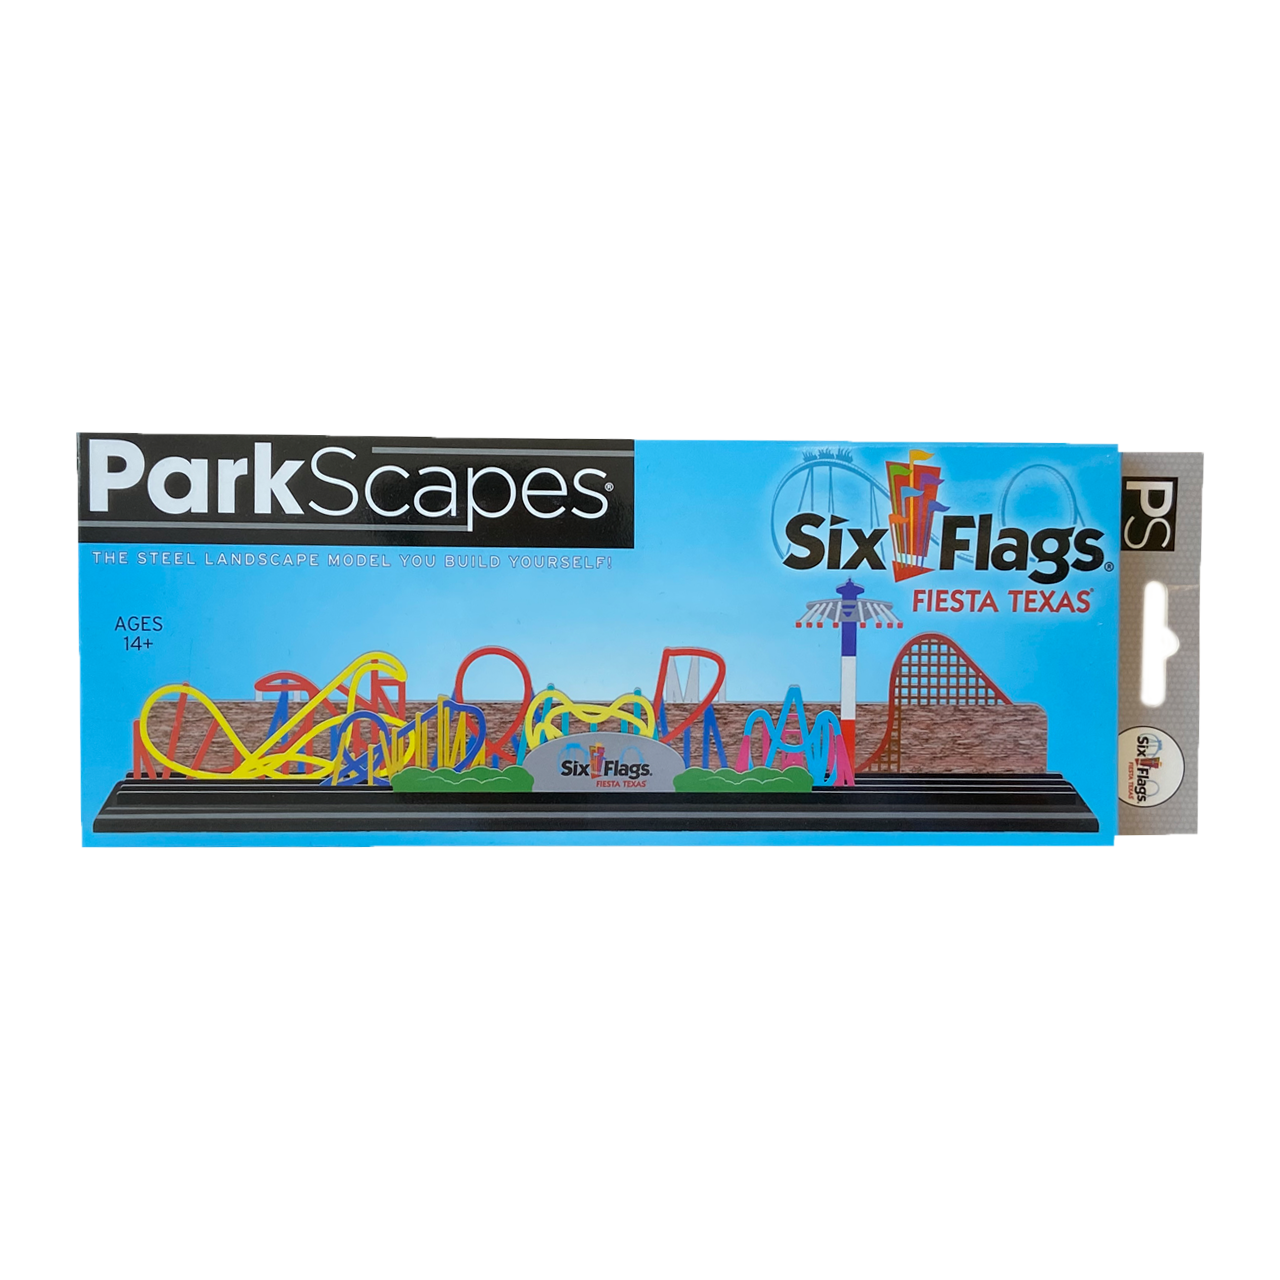 SIX FLAGS PARKSCAPES - FIESTA TEXAS PACKAGE